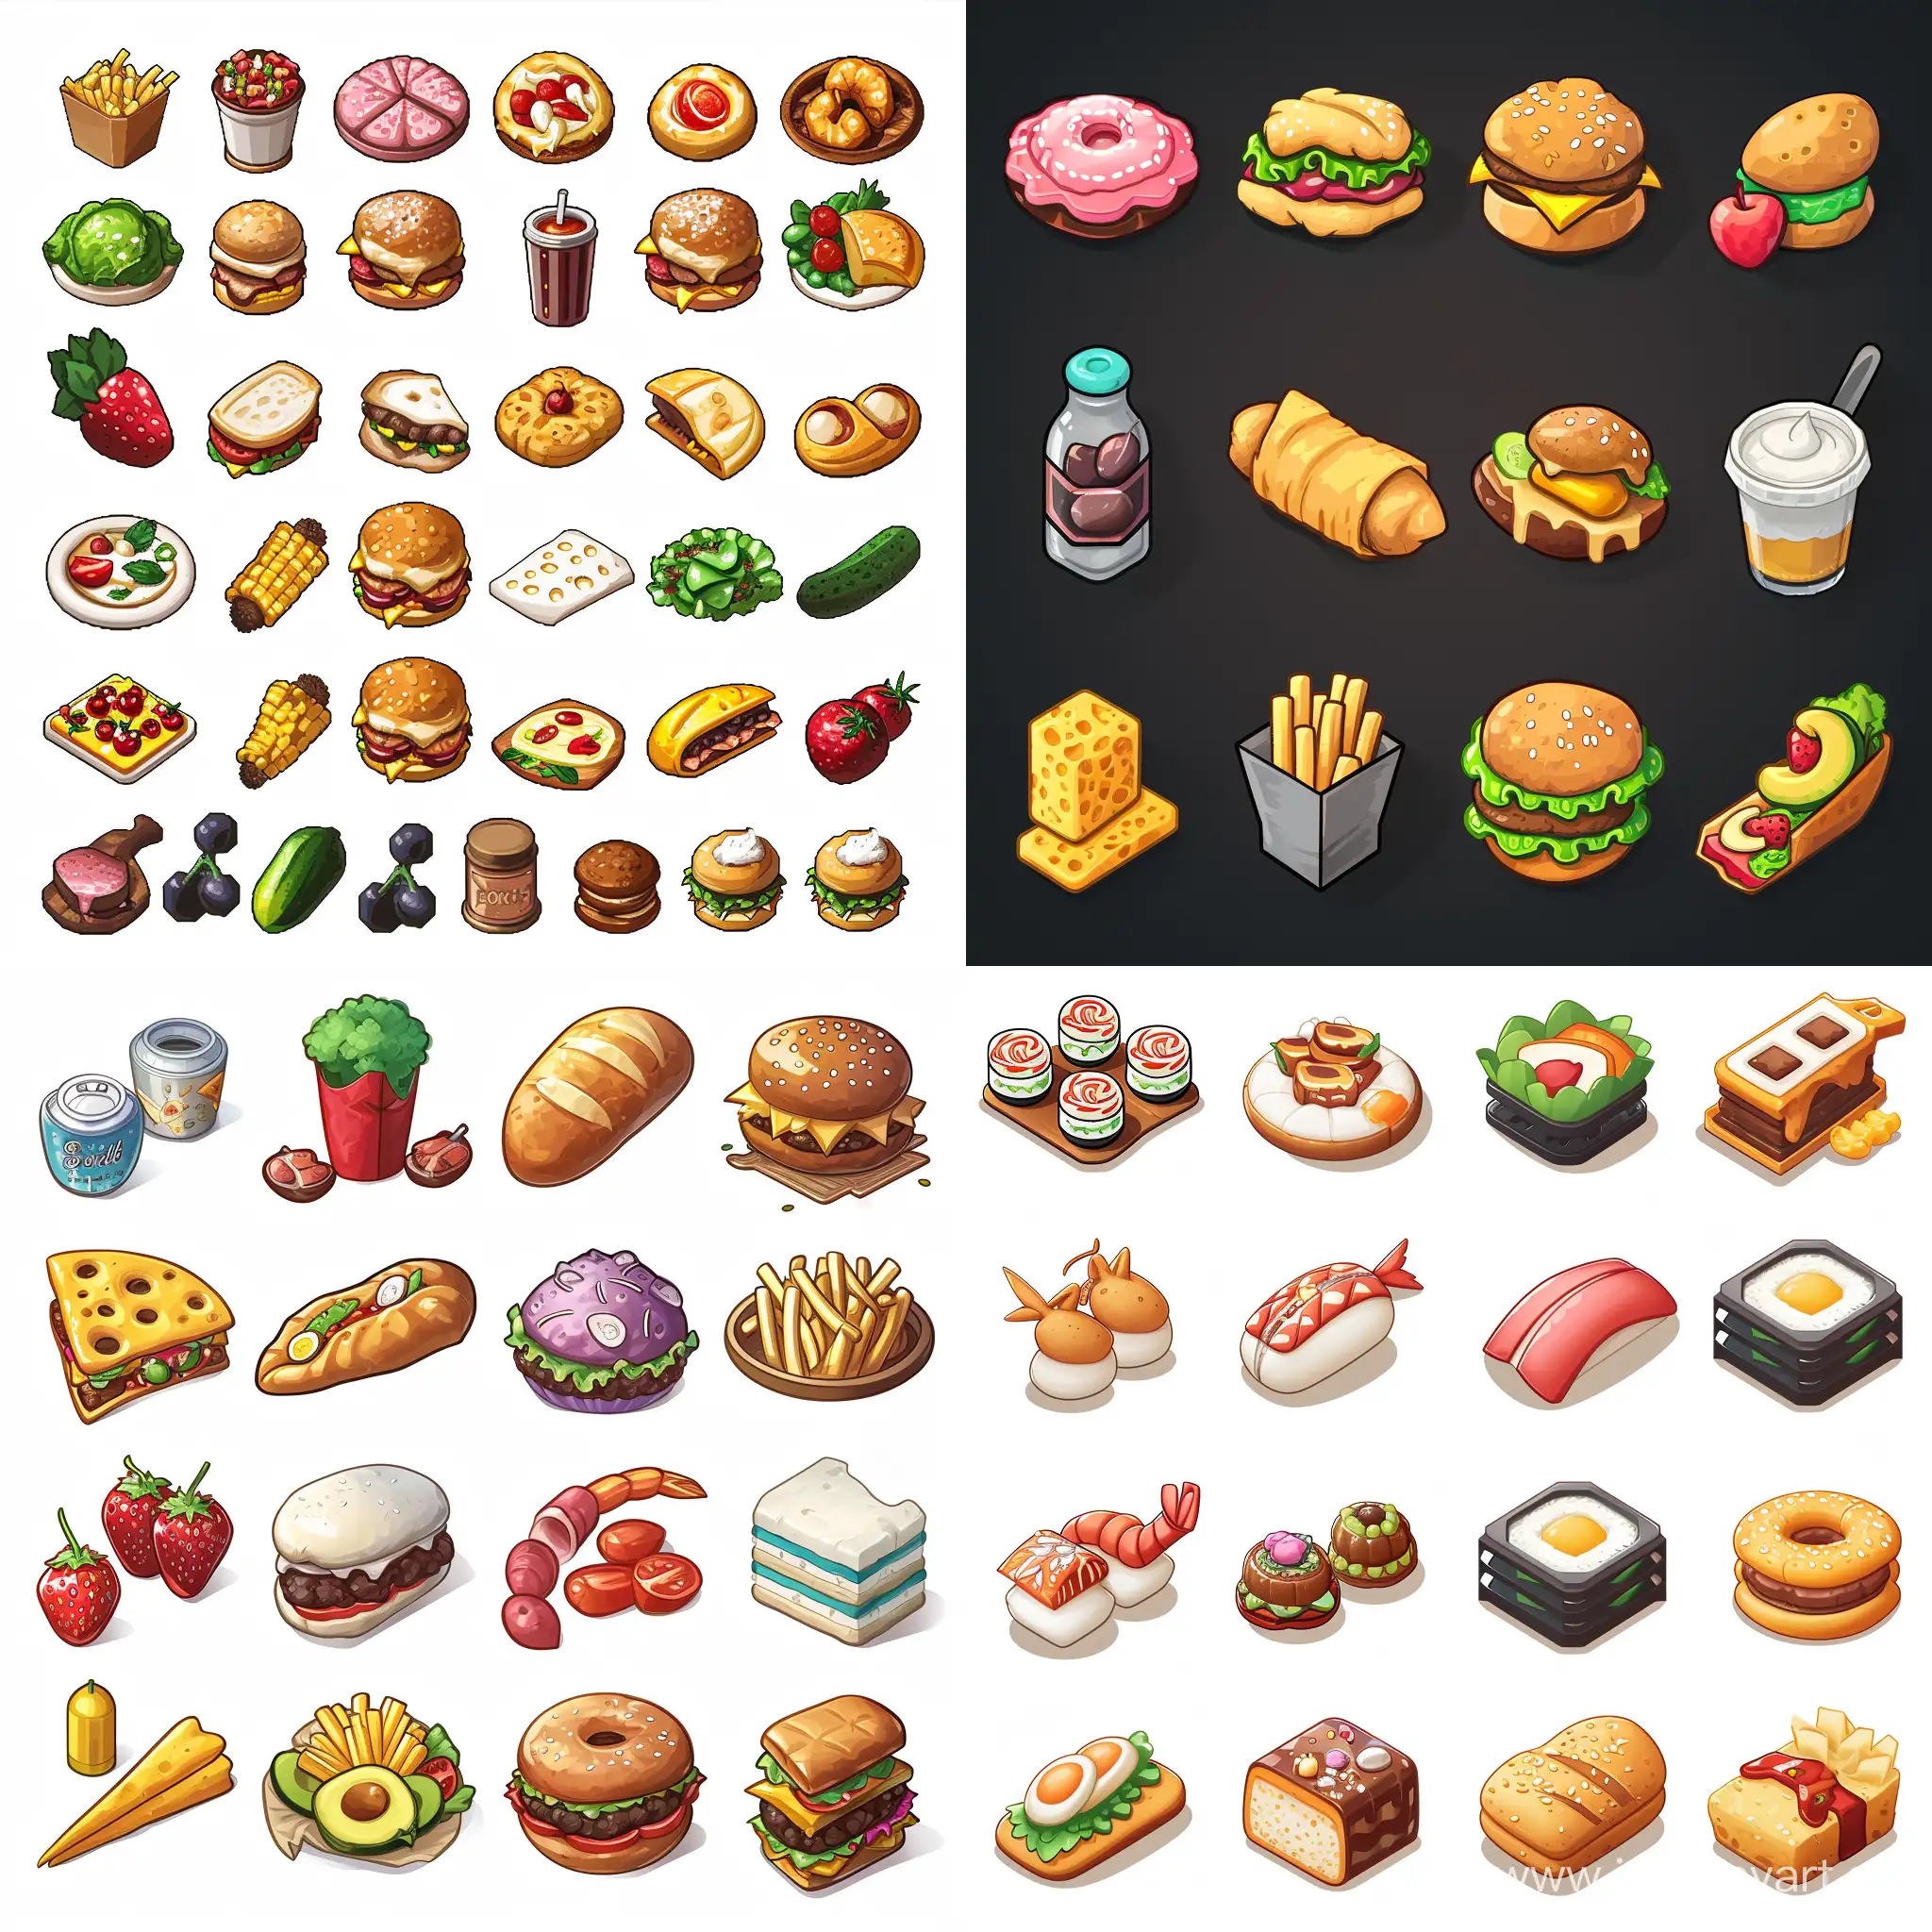 Delicious-Food-Items-Spritesheet-with-Vibrant-Visuals